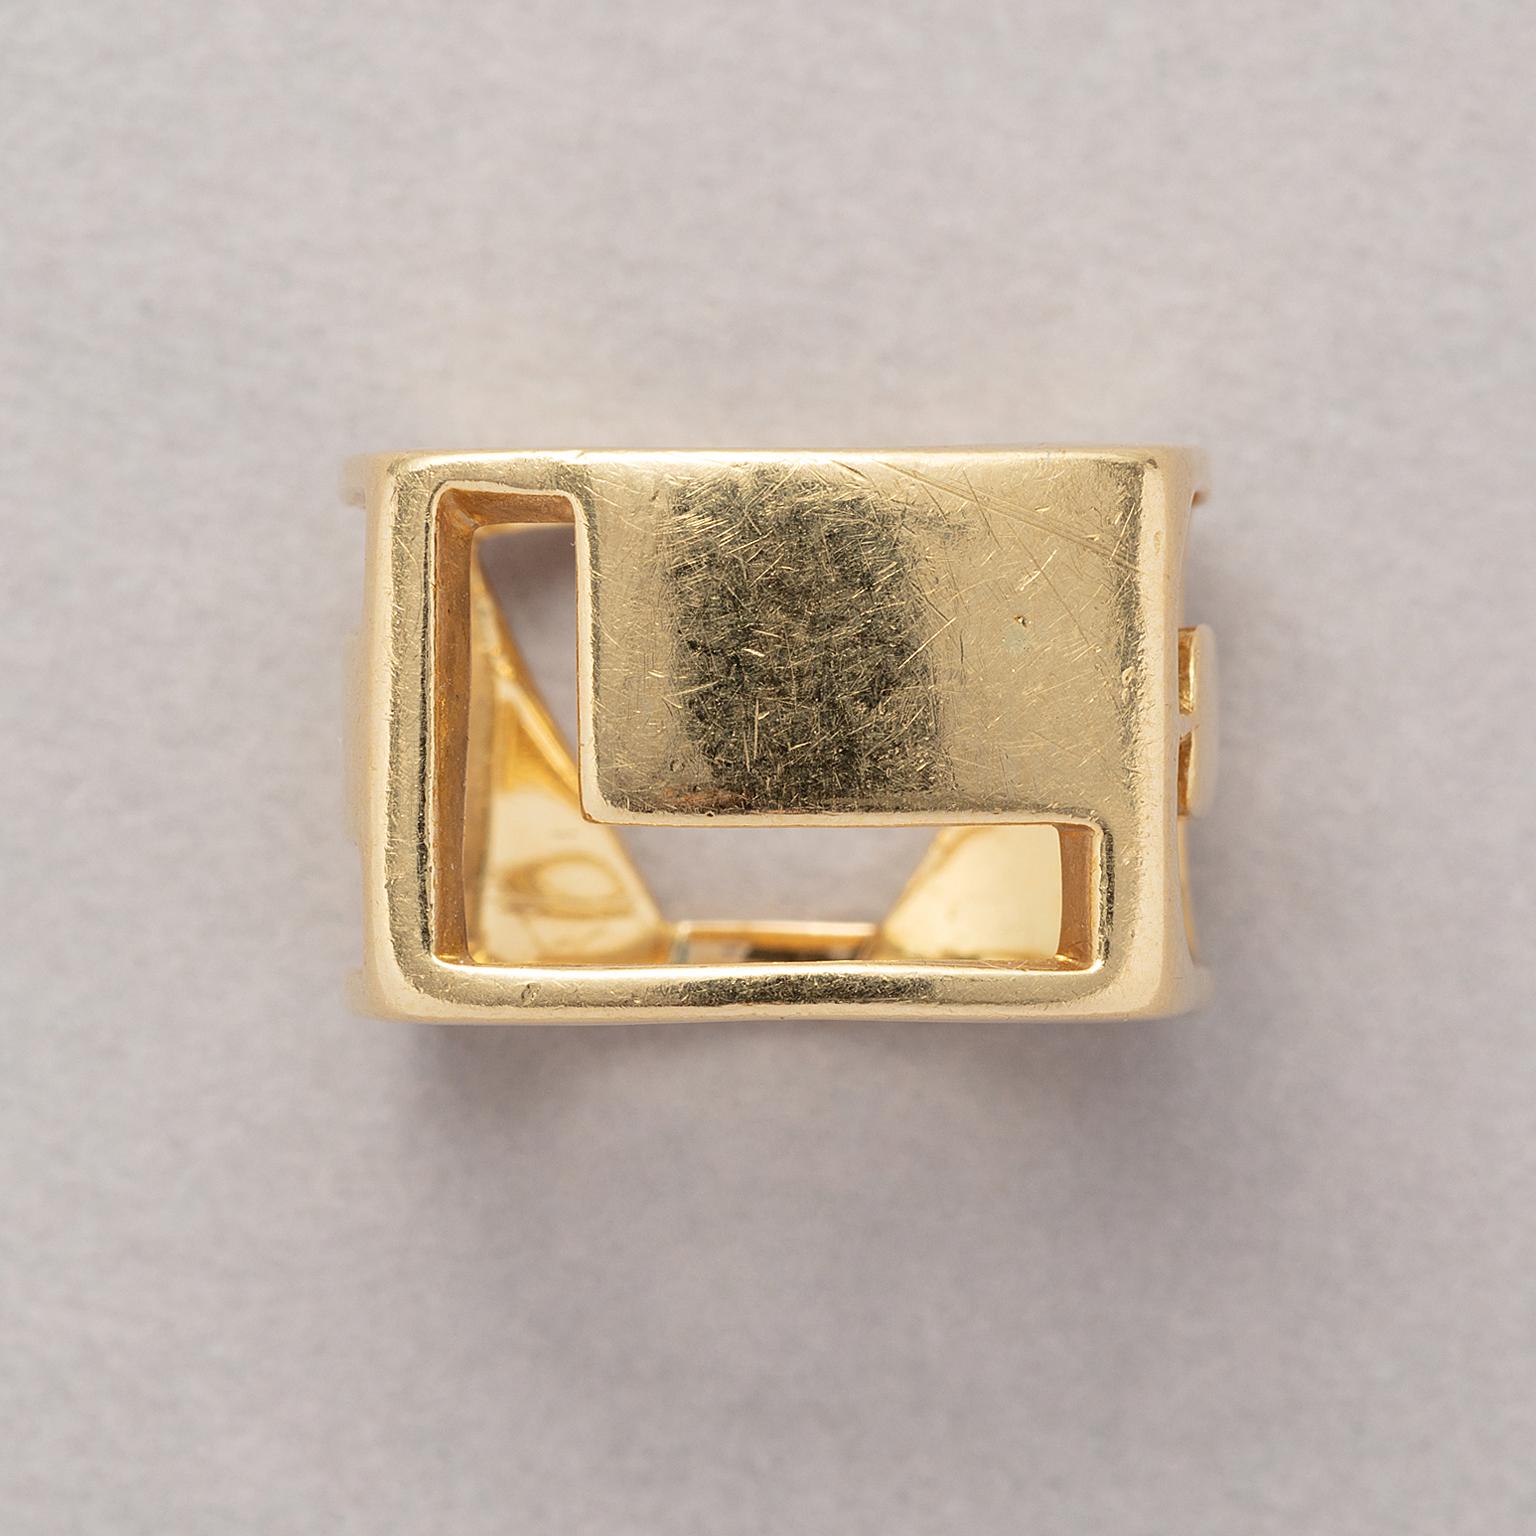 A rectangular, 18 carat yellow gold ‘Love’ band ring made of cut-out letters ‘L’, ‘O’, ‘V’ and ‘E’. Signed Tiffany, attributed to Donald Claflin for Tiffany & Co. End of 1960-1970.

weight: 12.64 grams
size: 18.5 mm / 7 1/2 US
width: 12.5 mm / 1/2